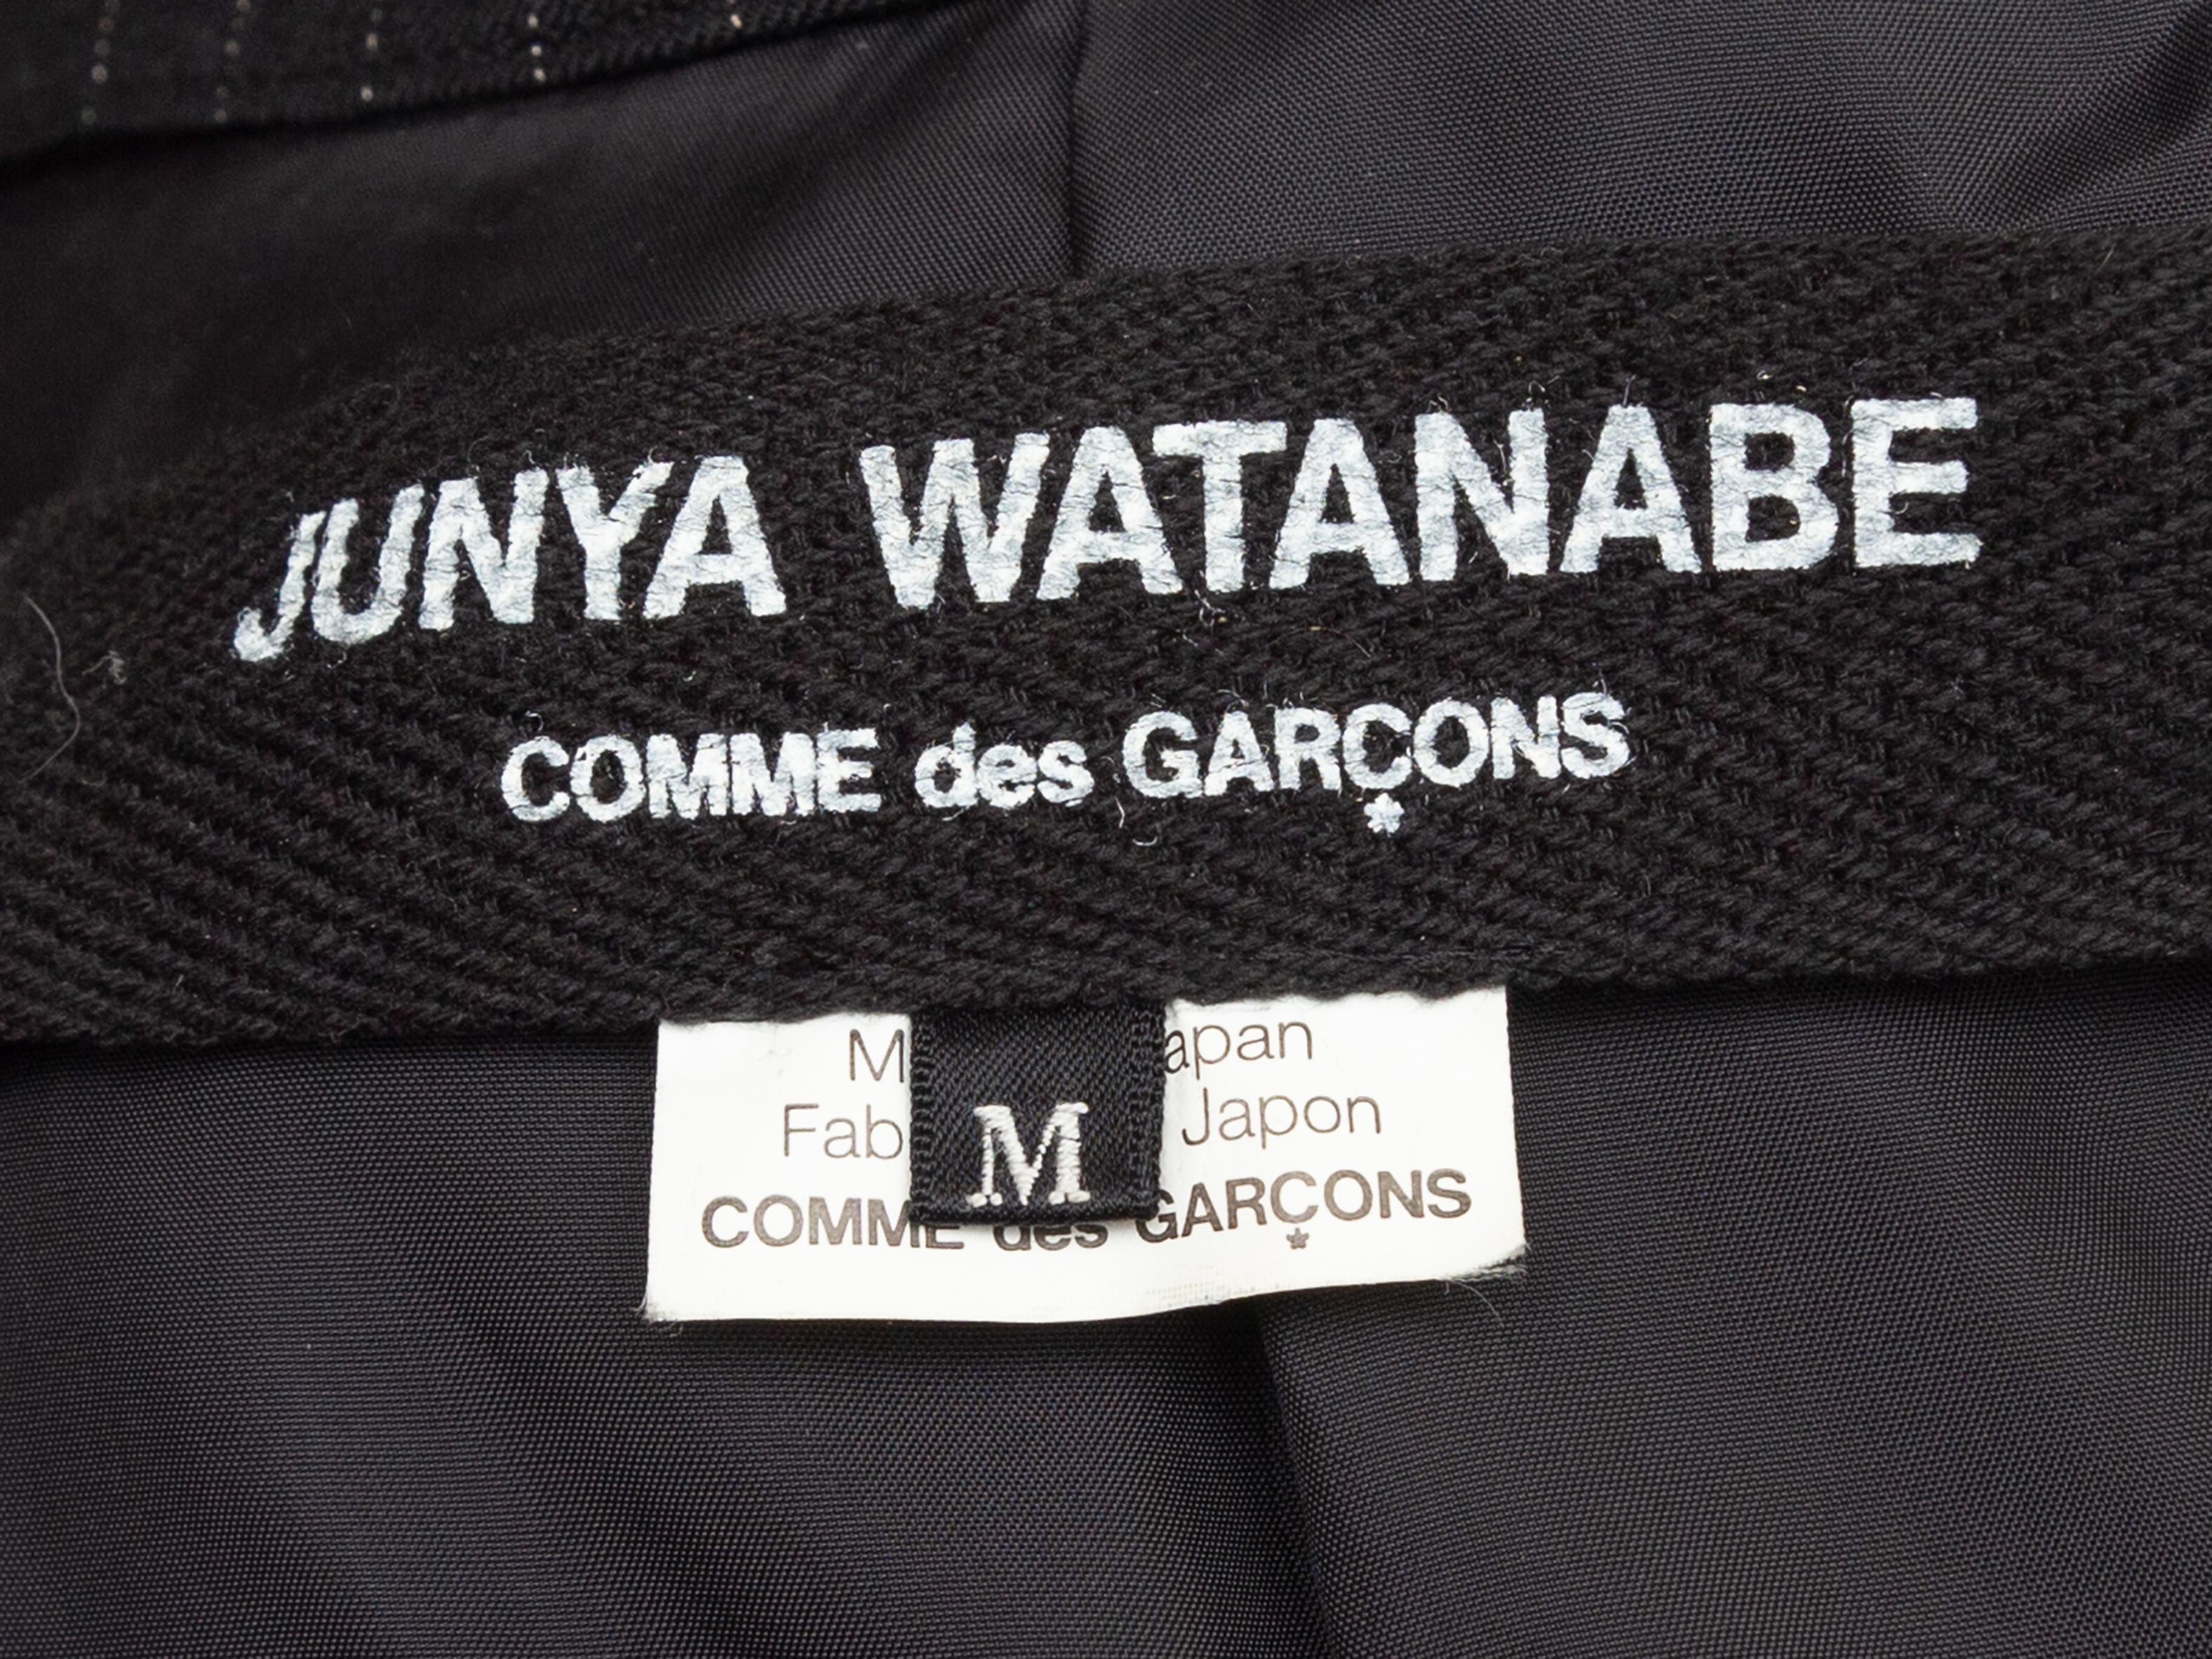 Product details: Black wool pinstripe blazer by Junya Watanabe Comme Des Garcons. Peaked lapel. Dual flap pockets at hips. Single button closure at front. 36